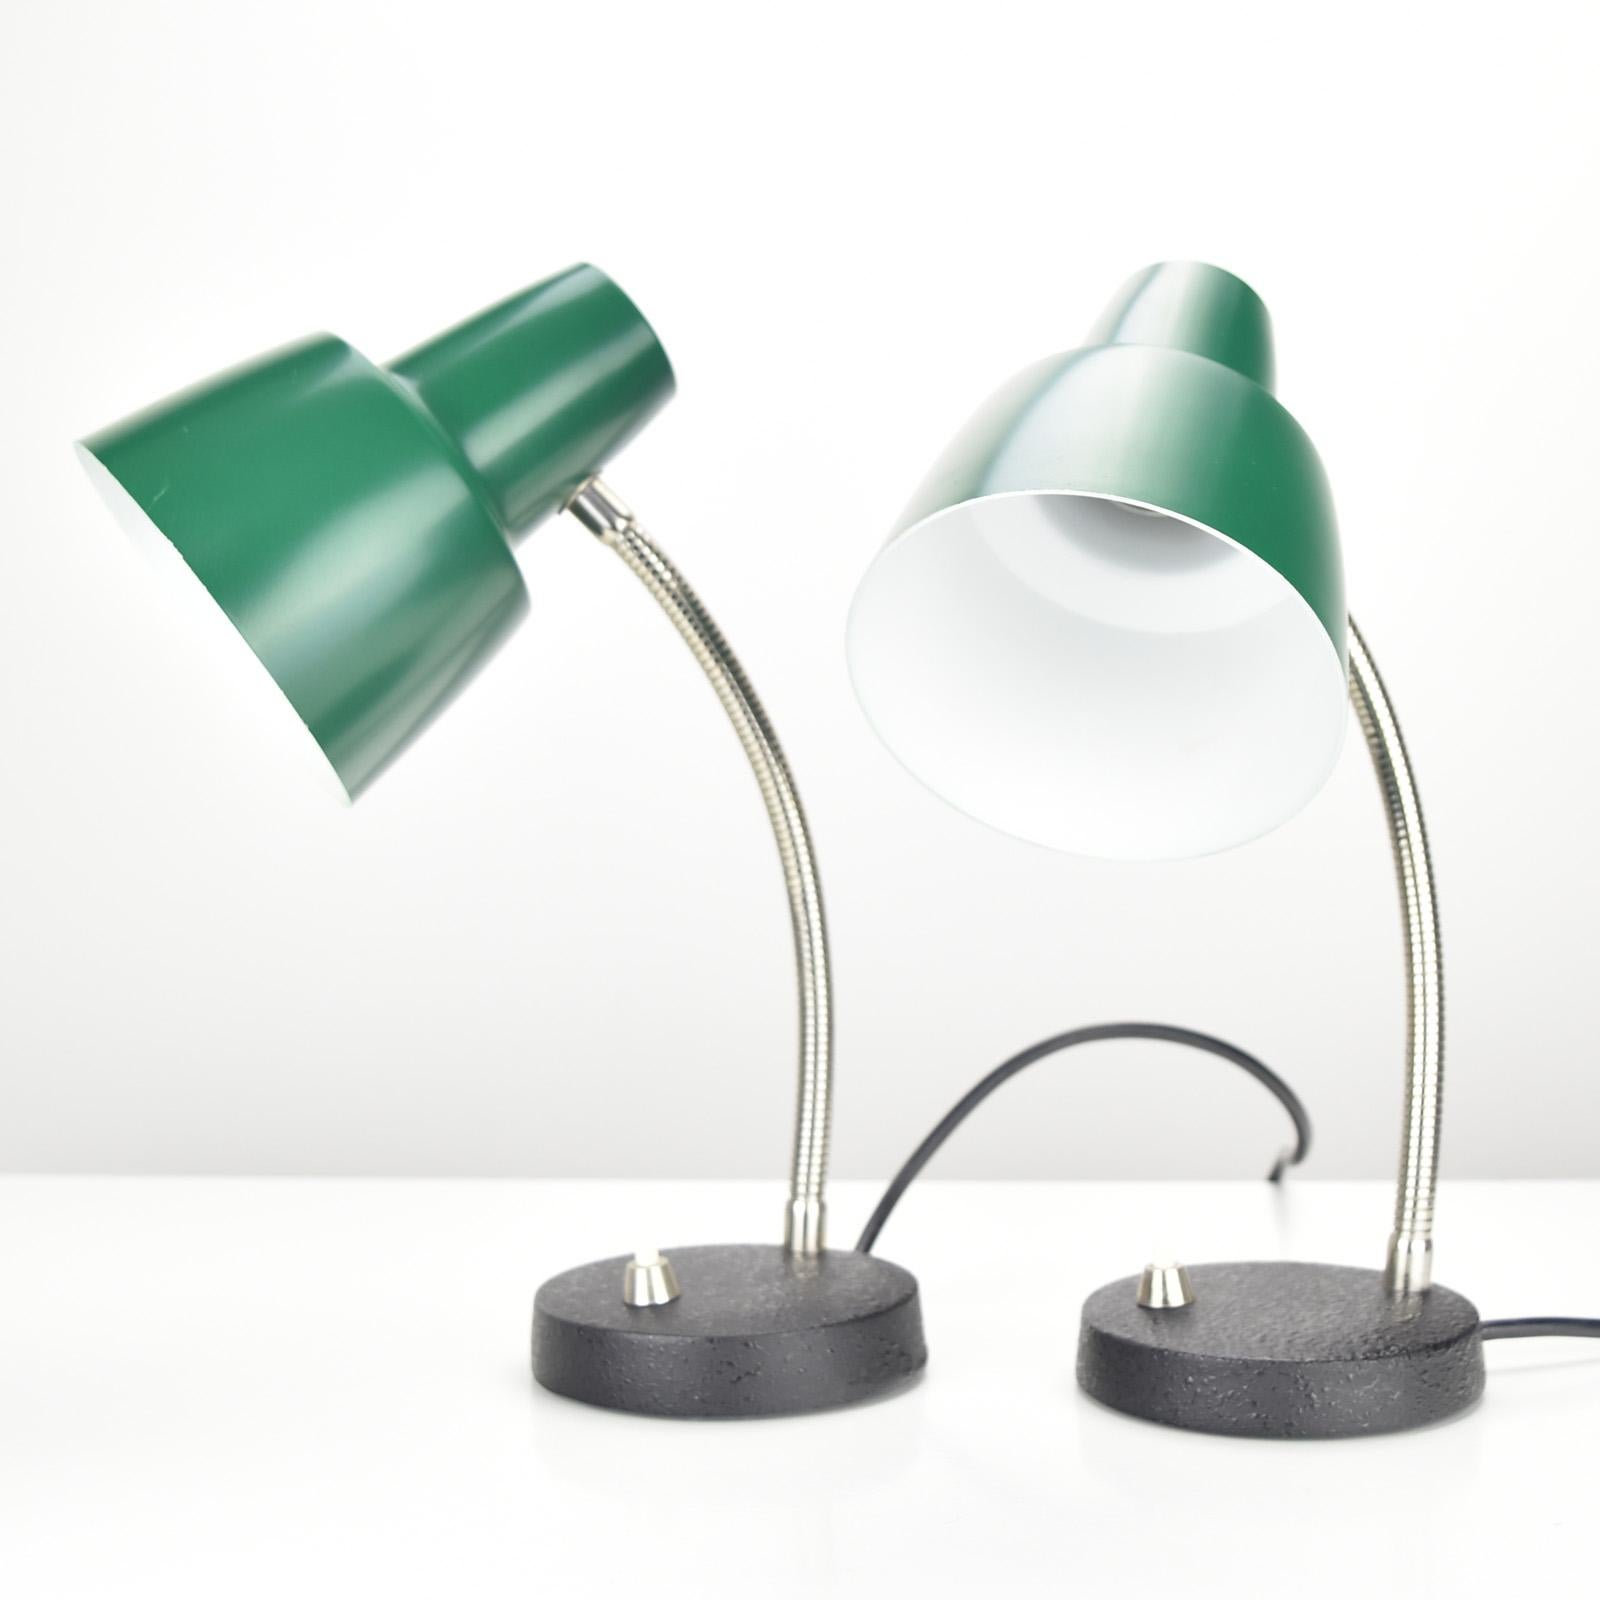 Vintage Pair of Bed Side Table Lamps by Hillebrand 1960s German Green Lacquered For Sale 1